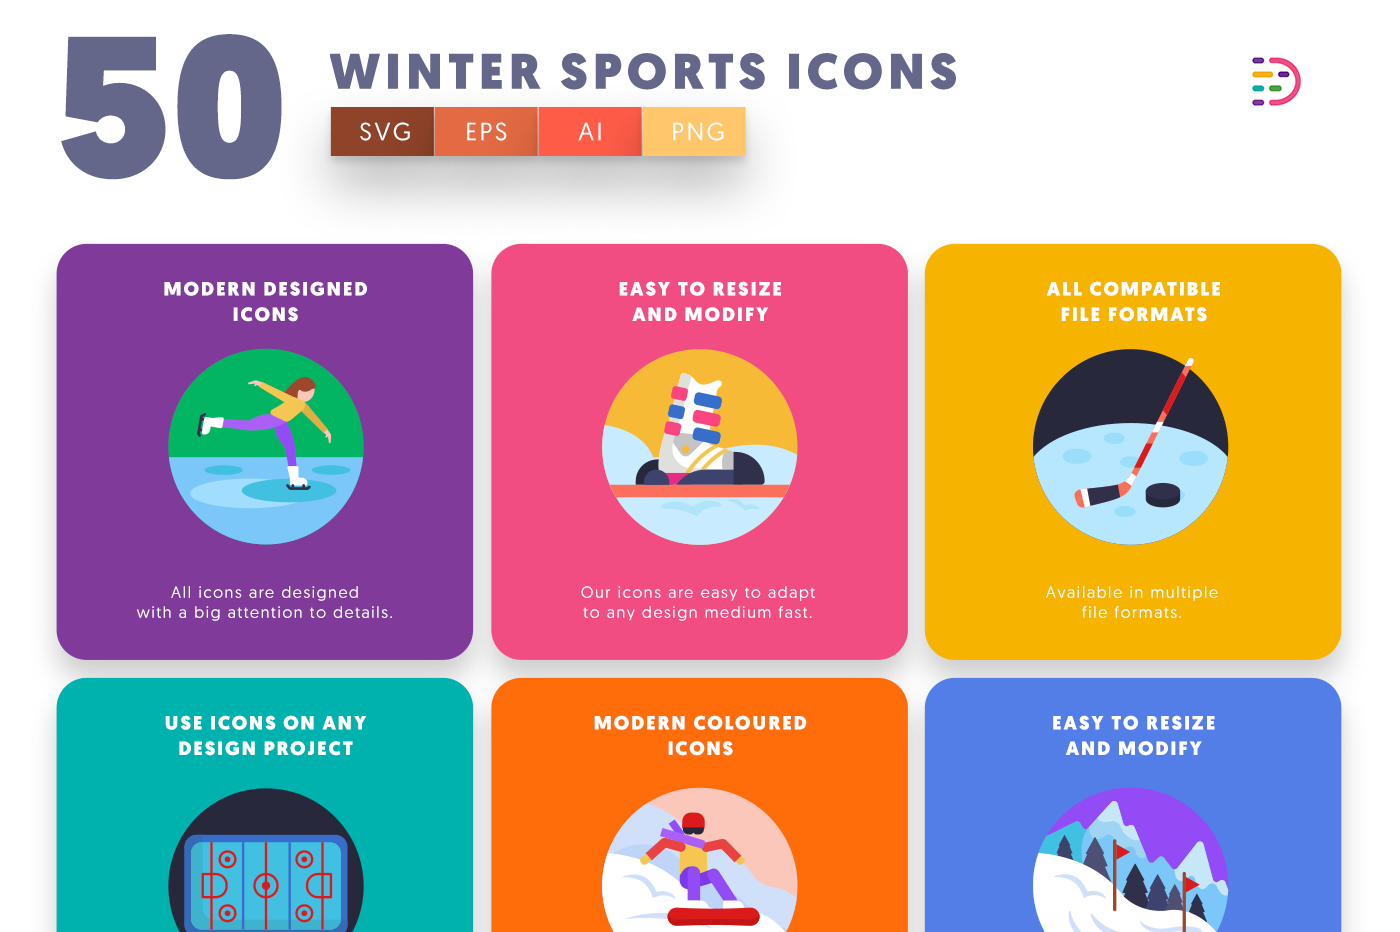  Winter Sports Icons with colored backgrounds 